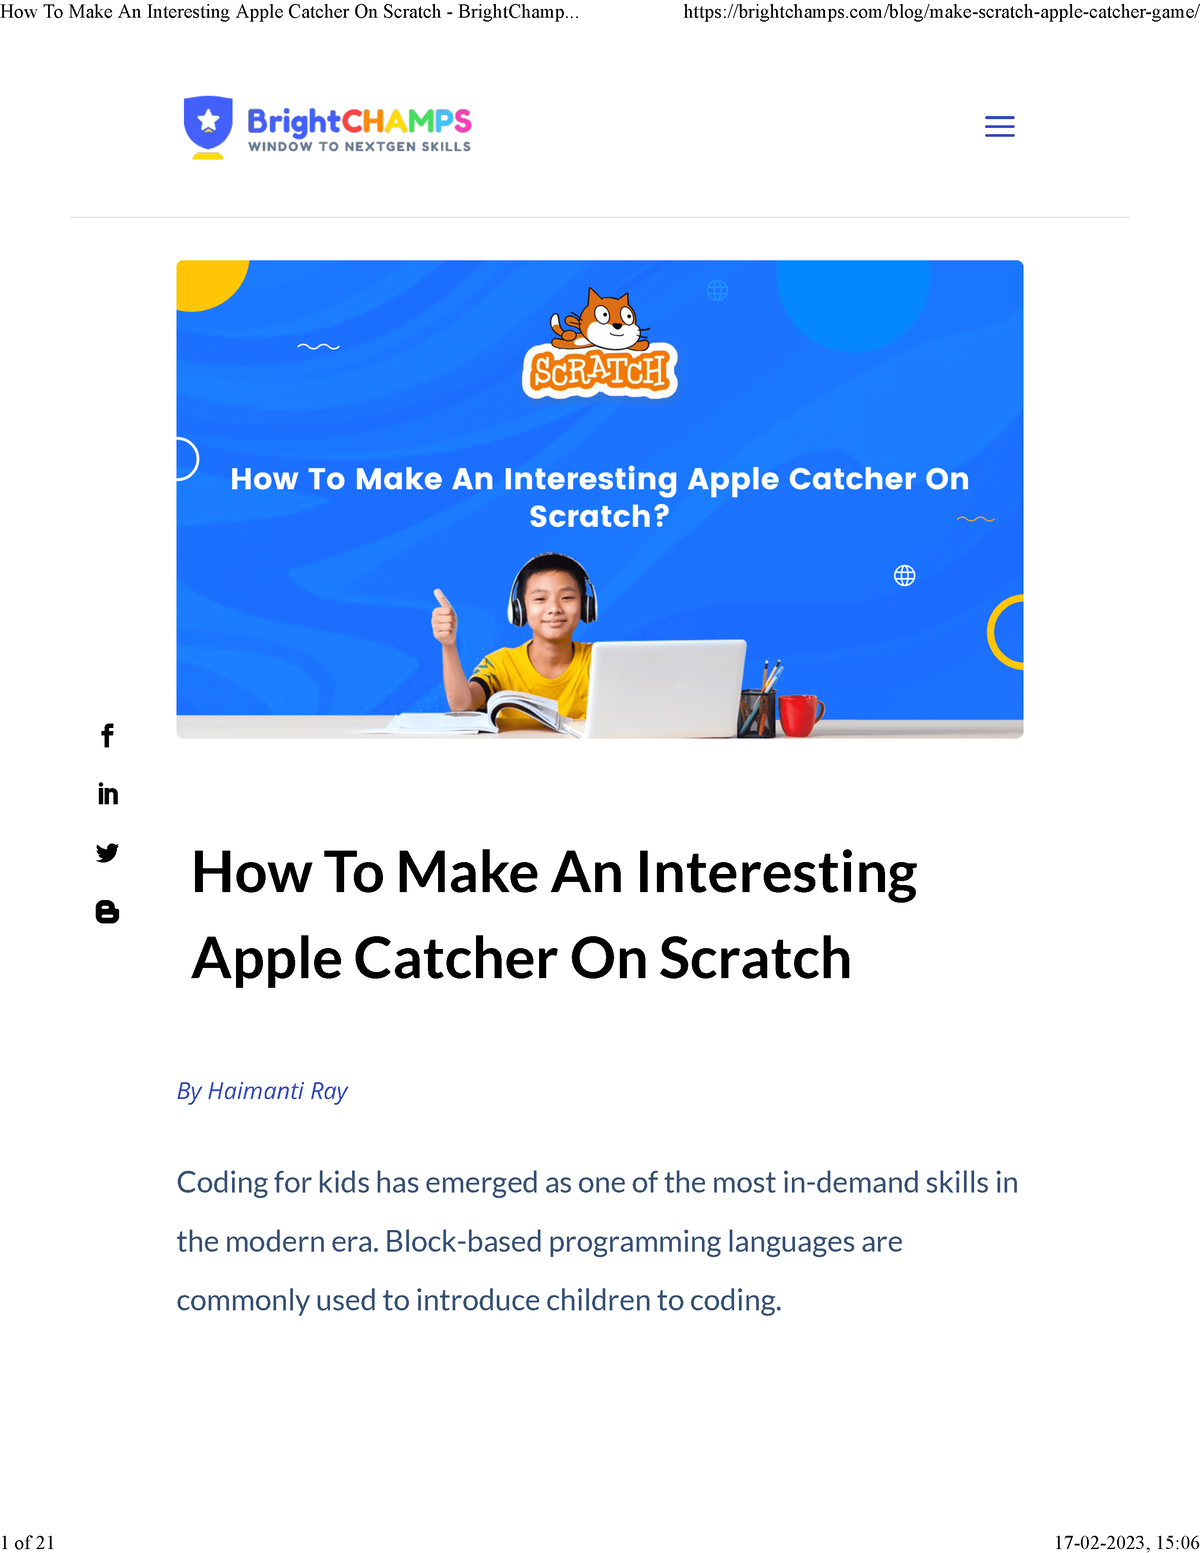 How to change or update the Scratch email address - BrightChamps Blog